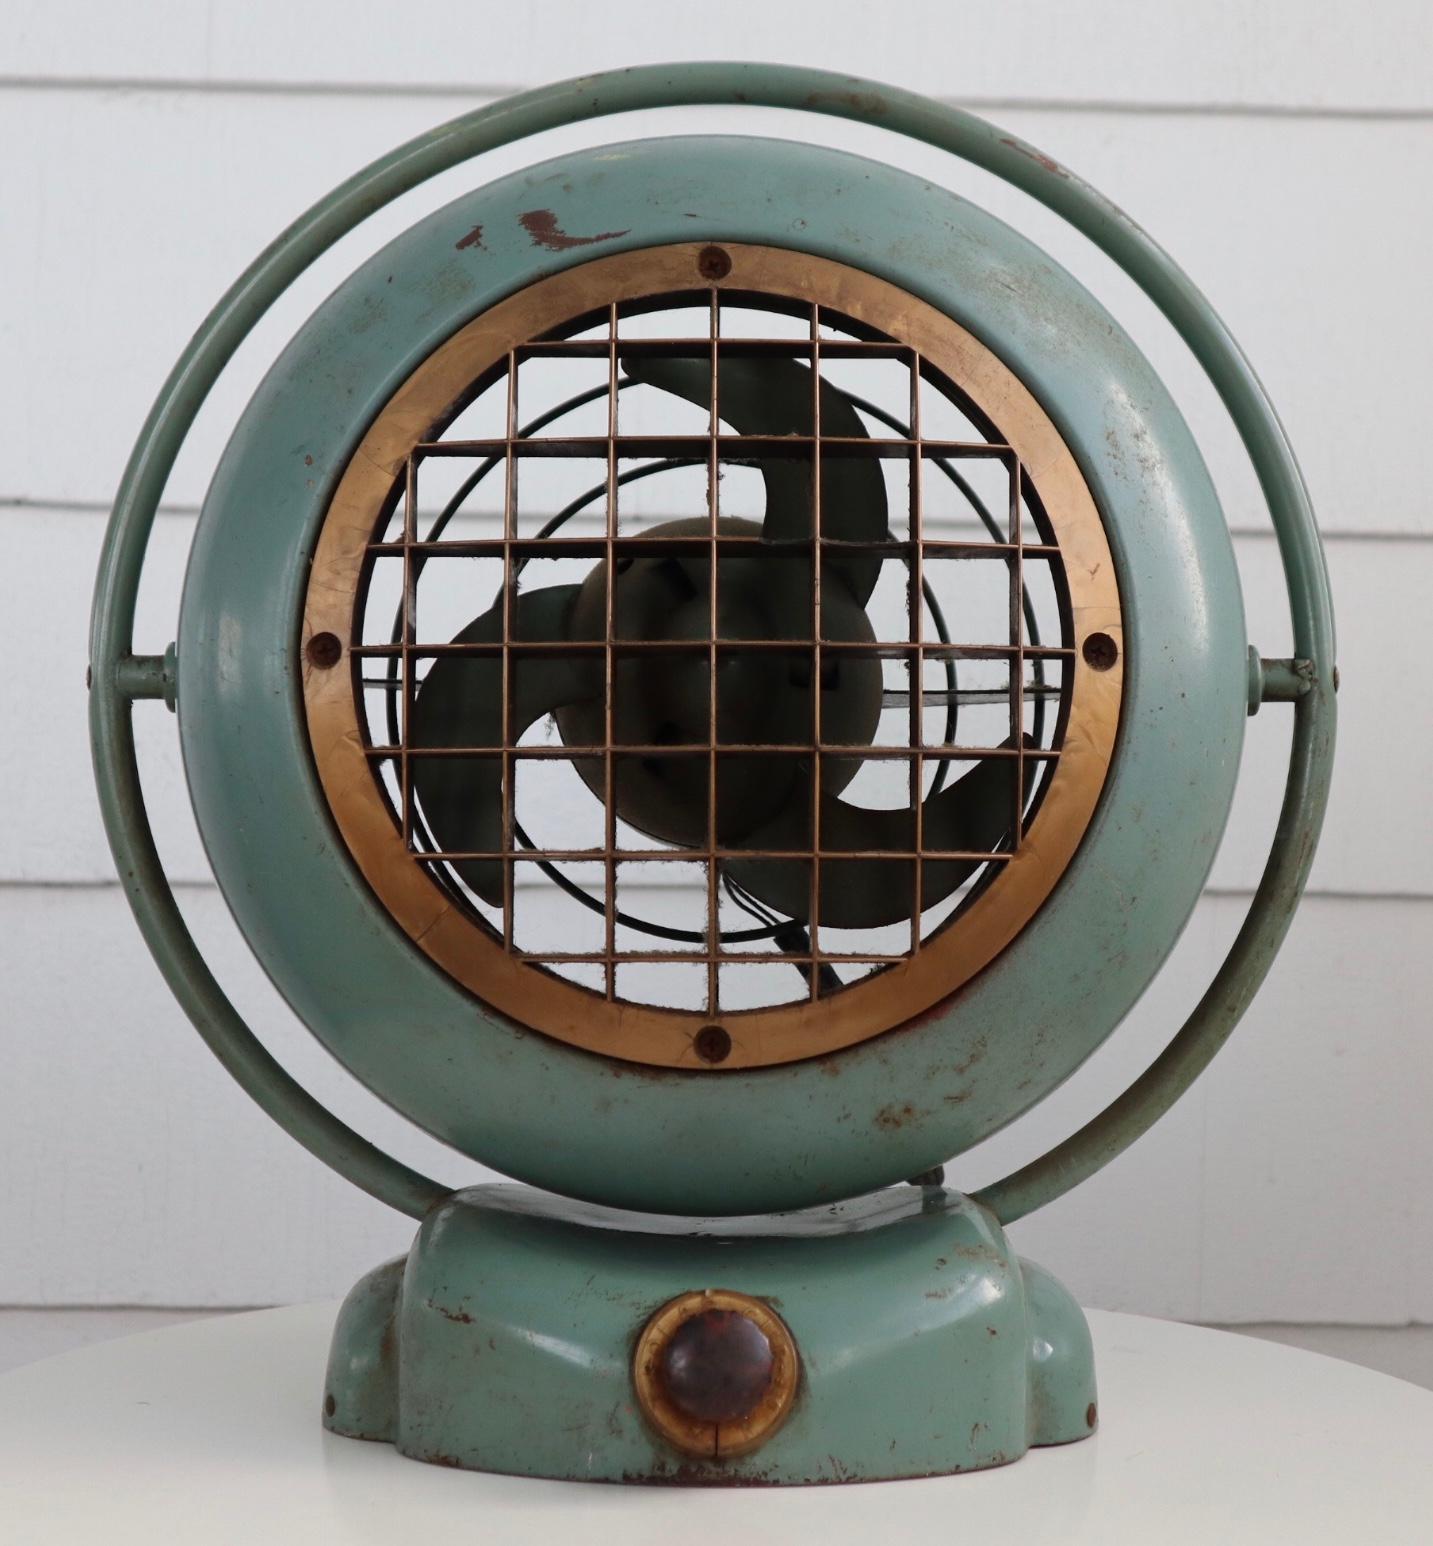 This piece boasts a gorgeous seafoam green color with a patina to die for. It works and blows air at 3 speeds. Metal construction with elegant design evocative of Midcentury aviation styling and also looks like an antique diving helmet. Original